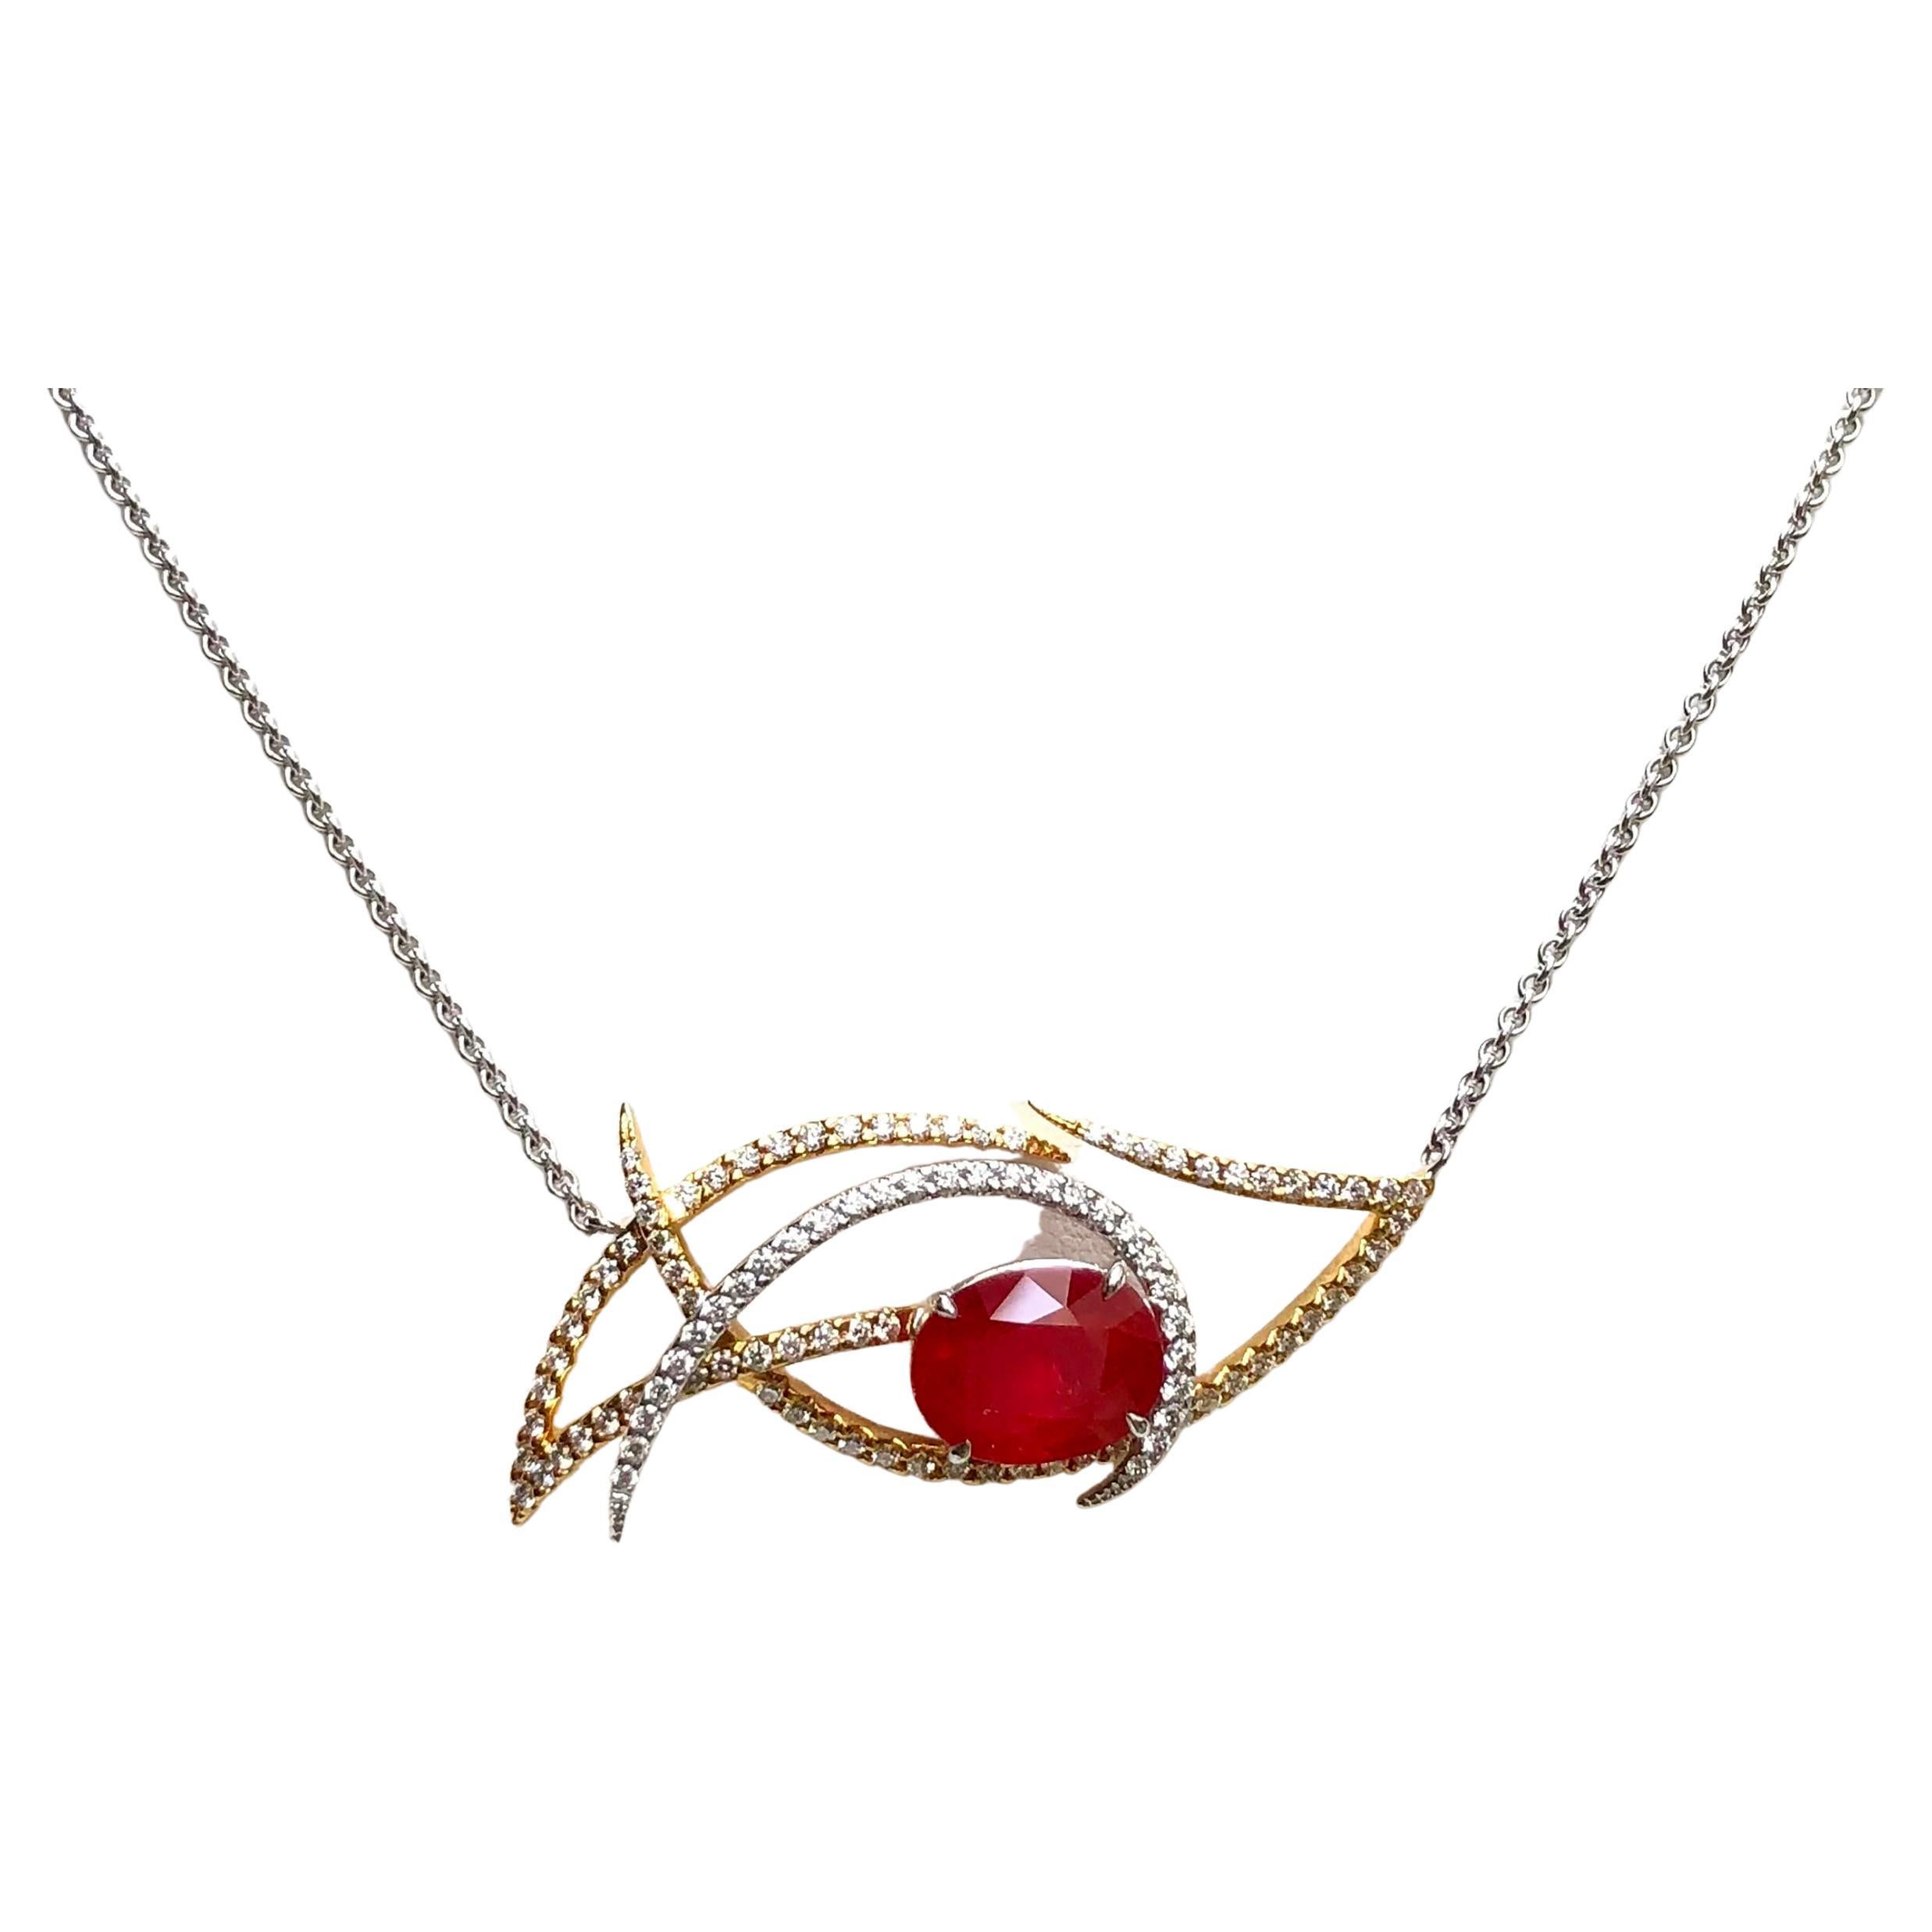 Orange Sapphire with Diamond Hornbill Necklace in 18K Gold by Kavant & Sharart For Sale